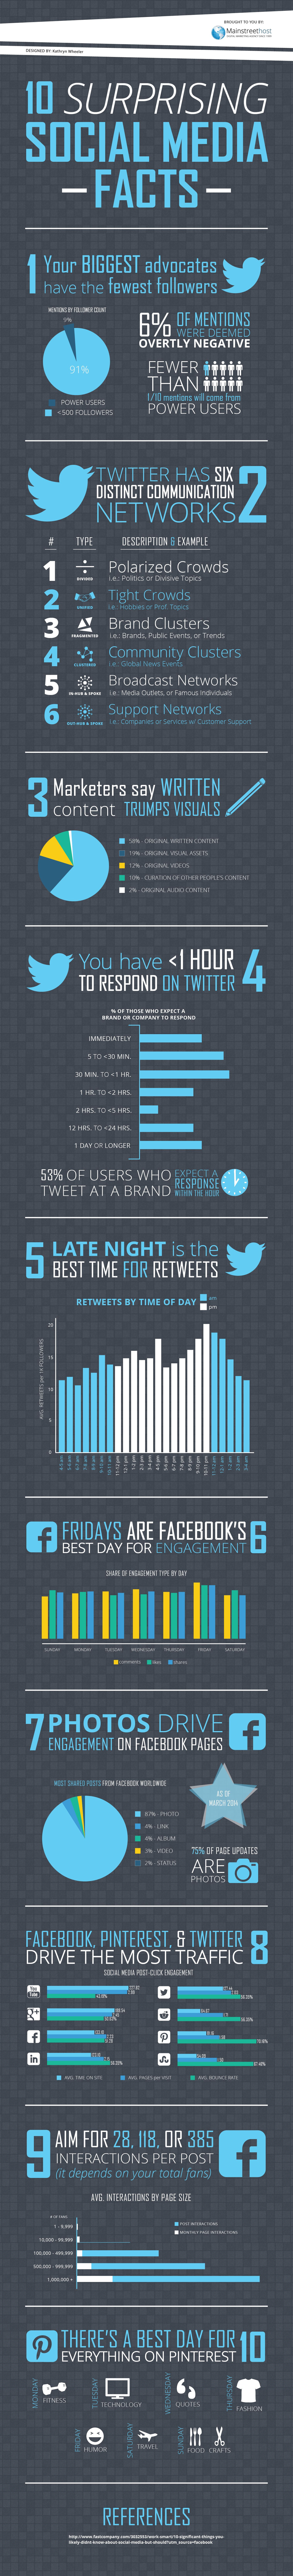 10 Surprising Social Media Facts Infographic